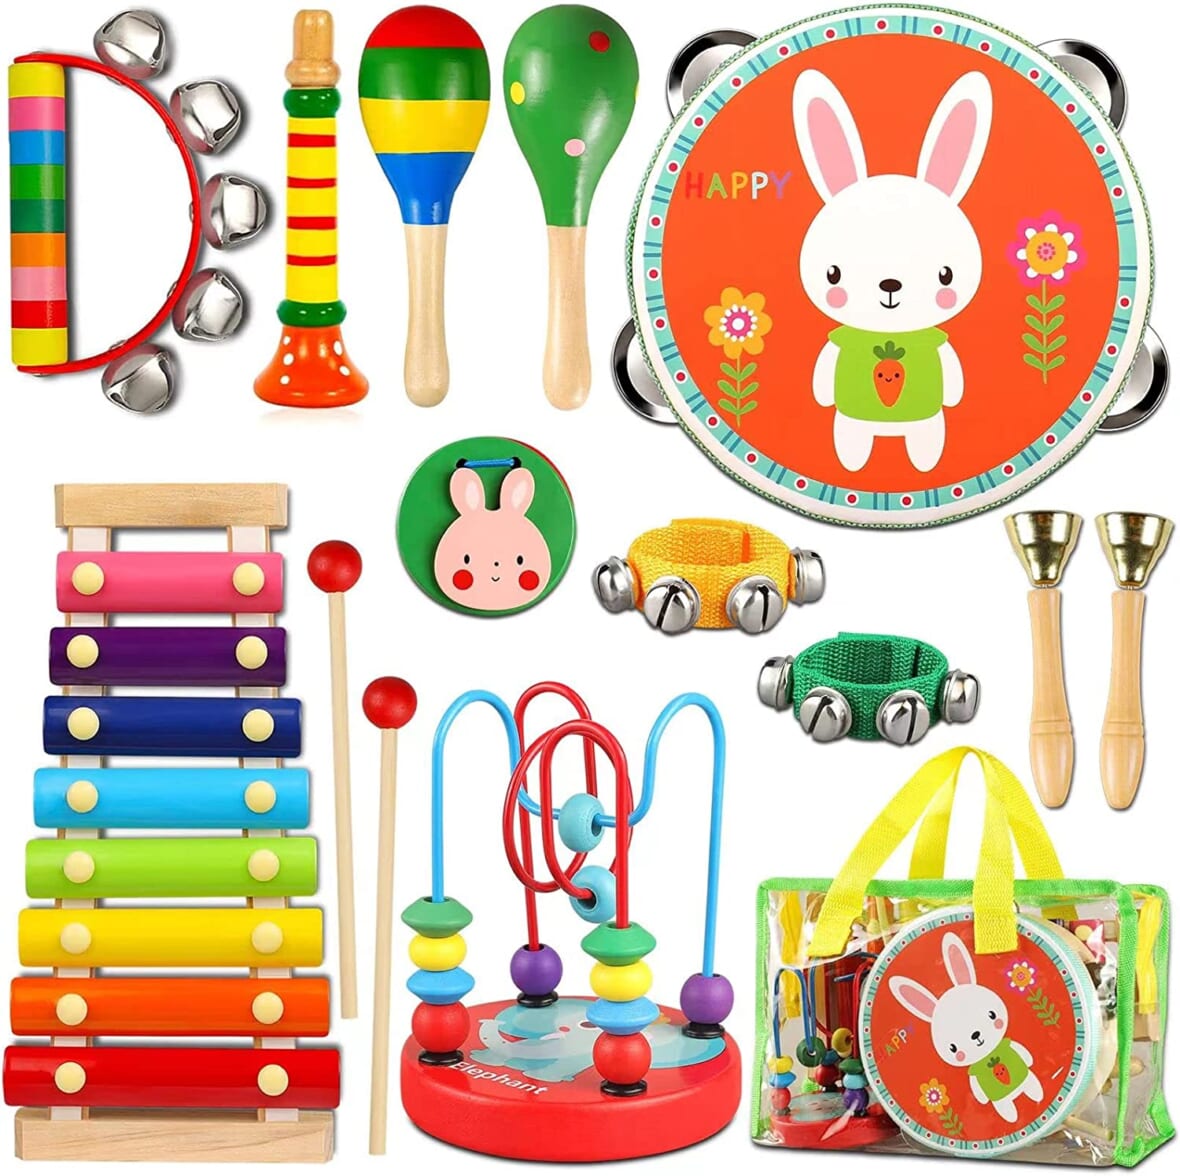 Best toys for 15 month old babies: musical instrument set